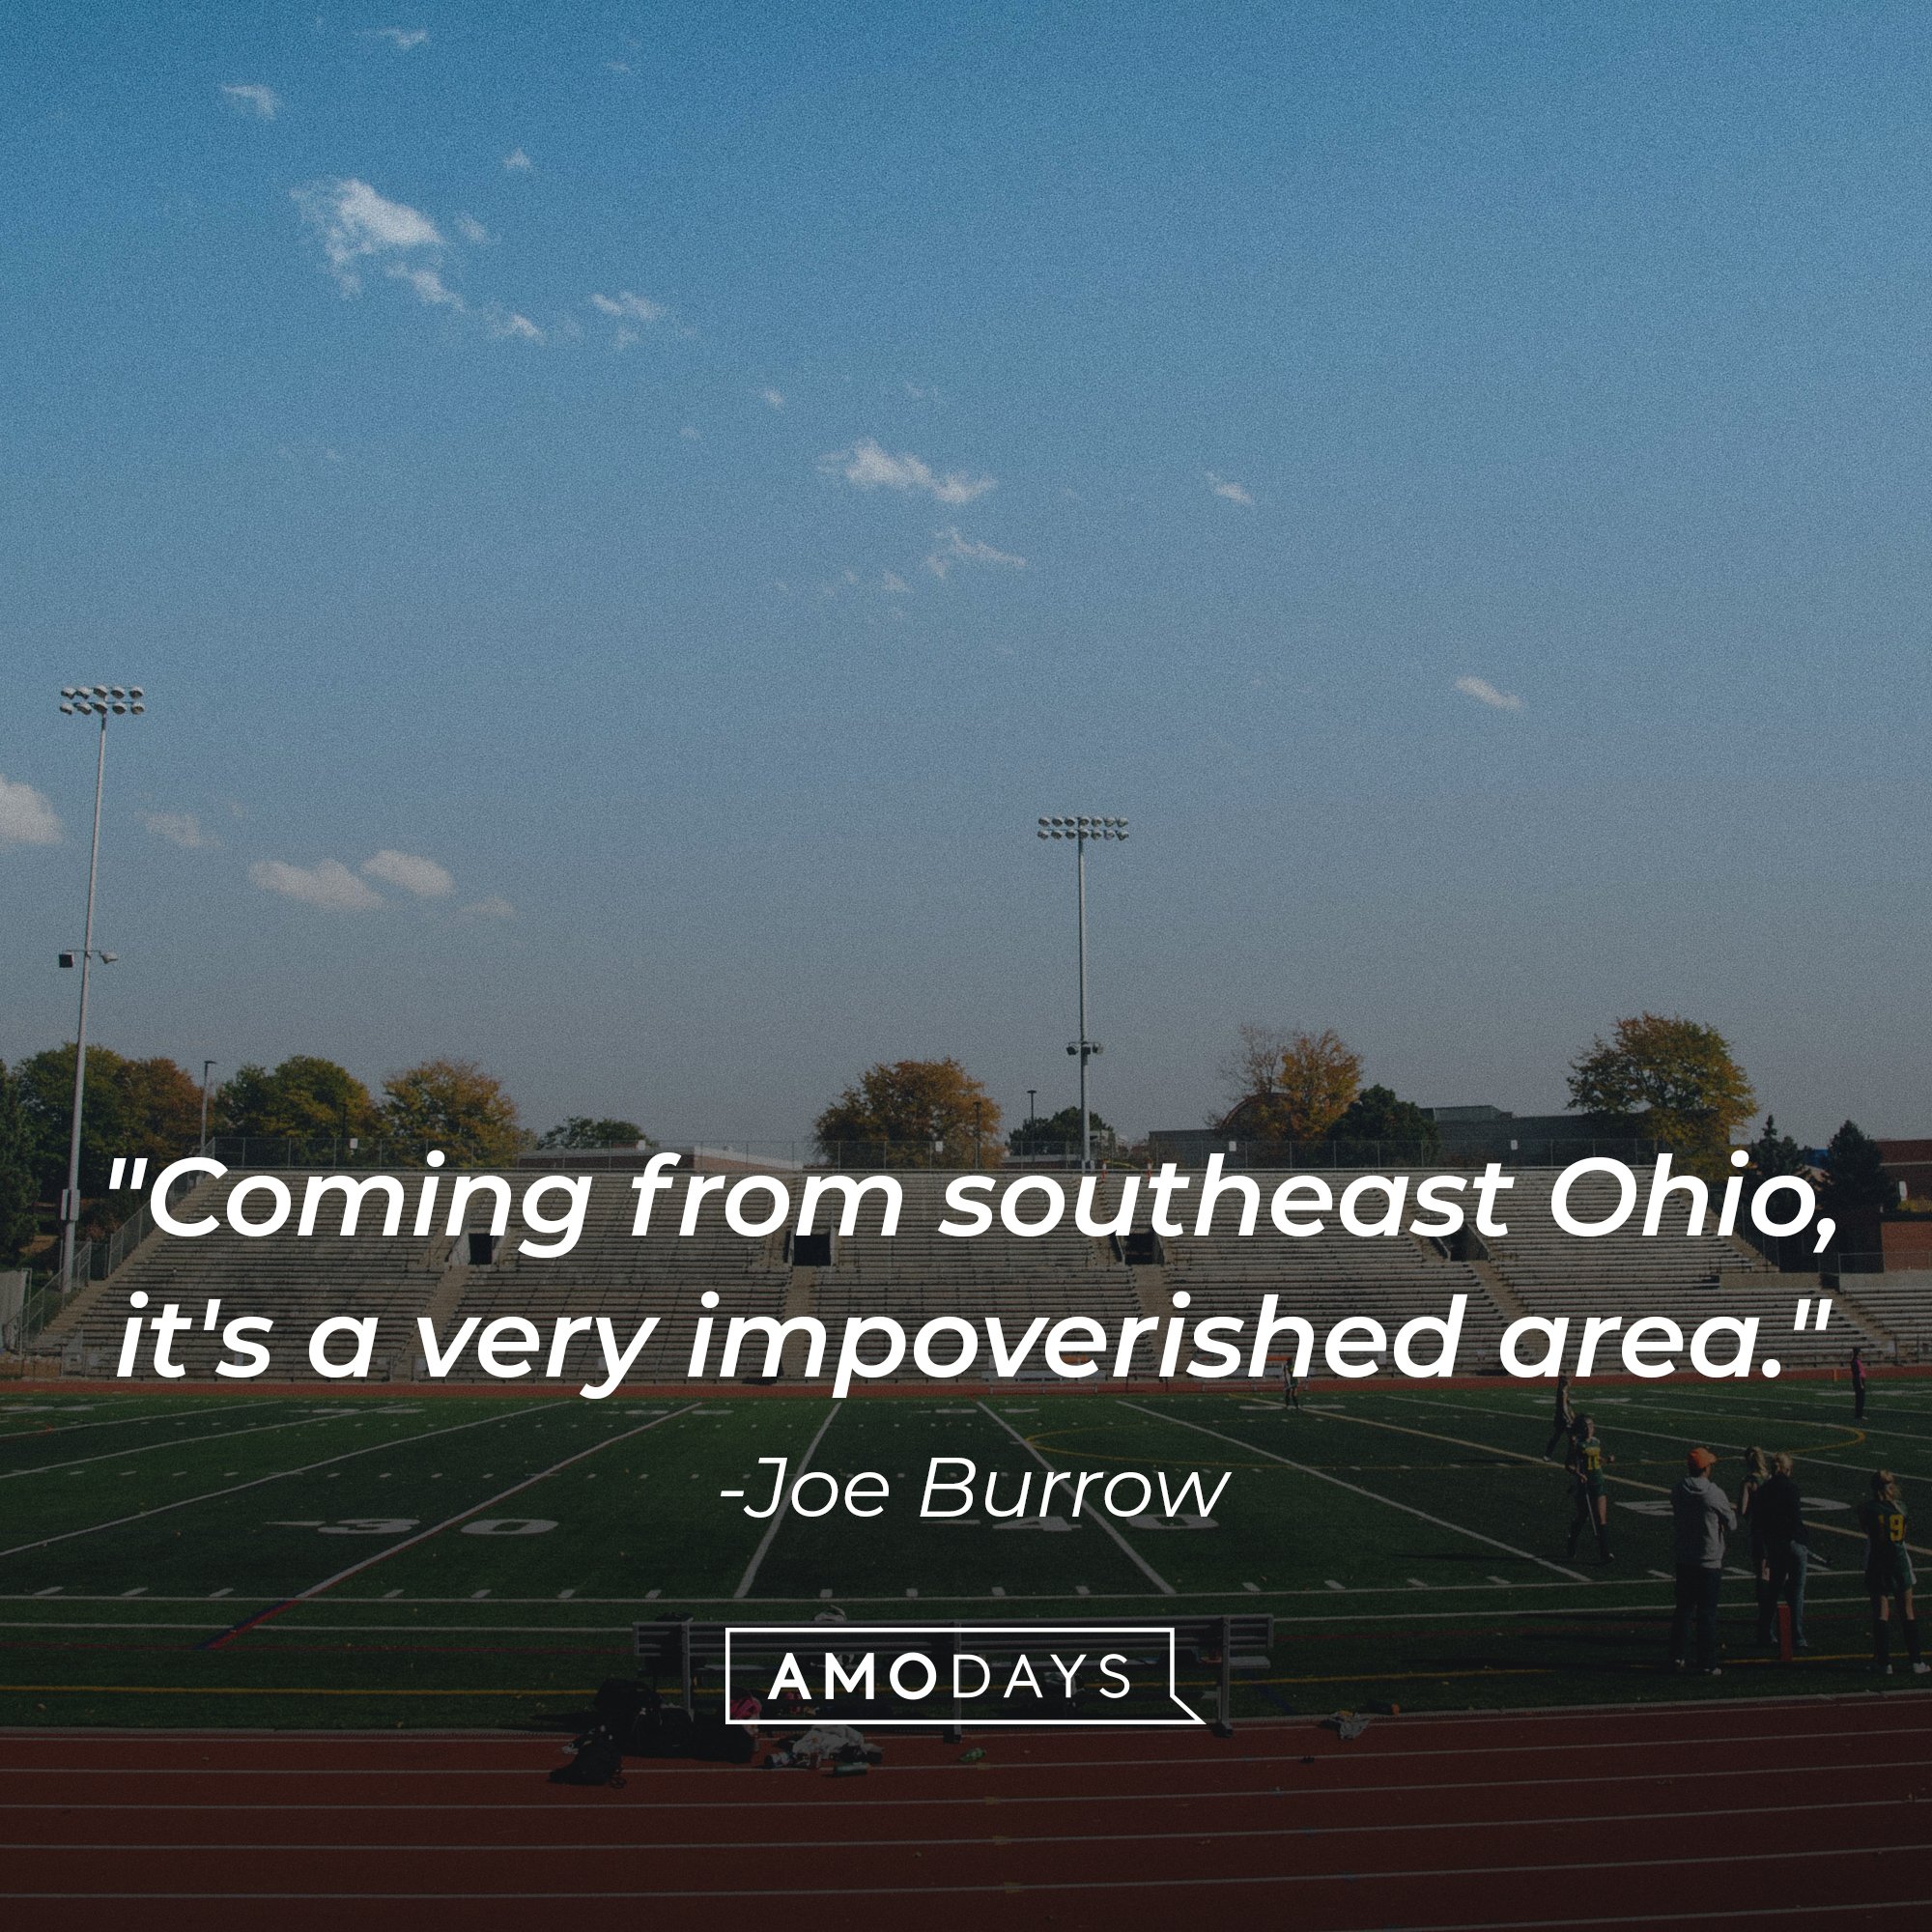  Joe Burrow's quote: "Coming from southeast Ohio, it's a very impoverished area.” | Image: AmoDays